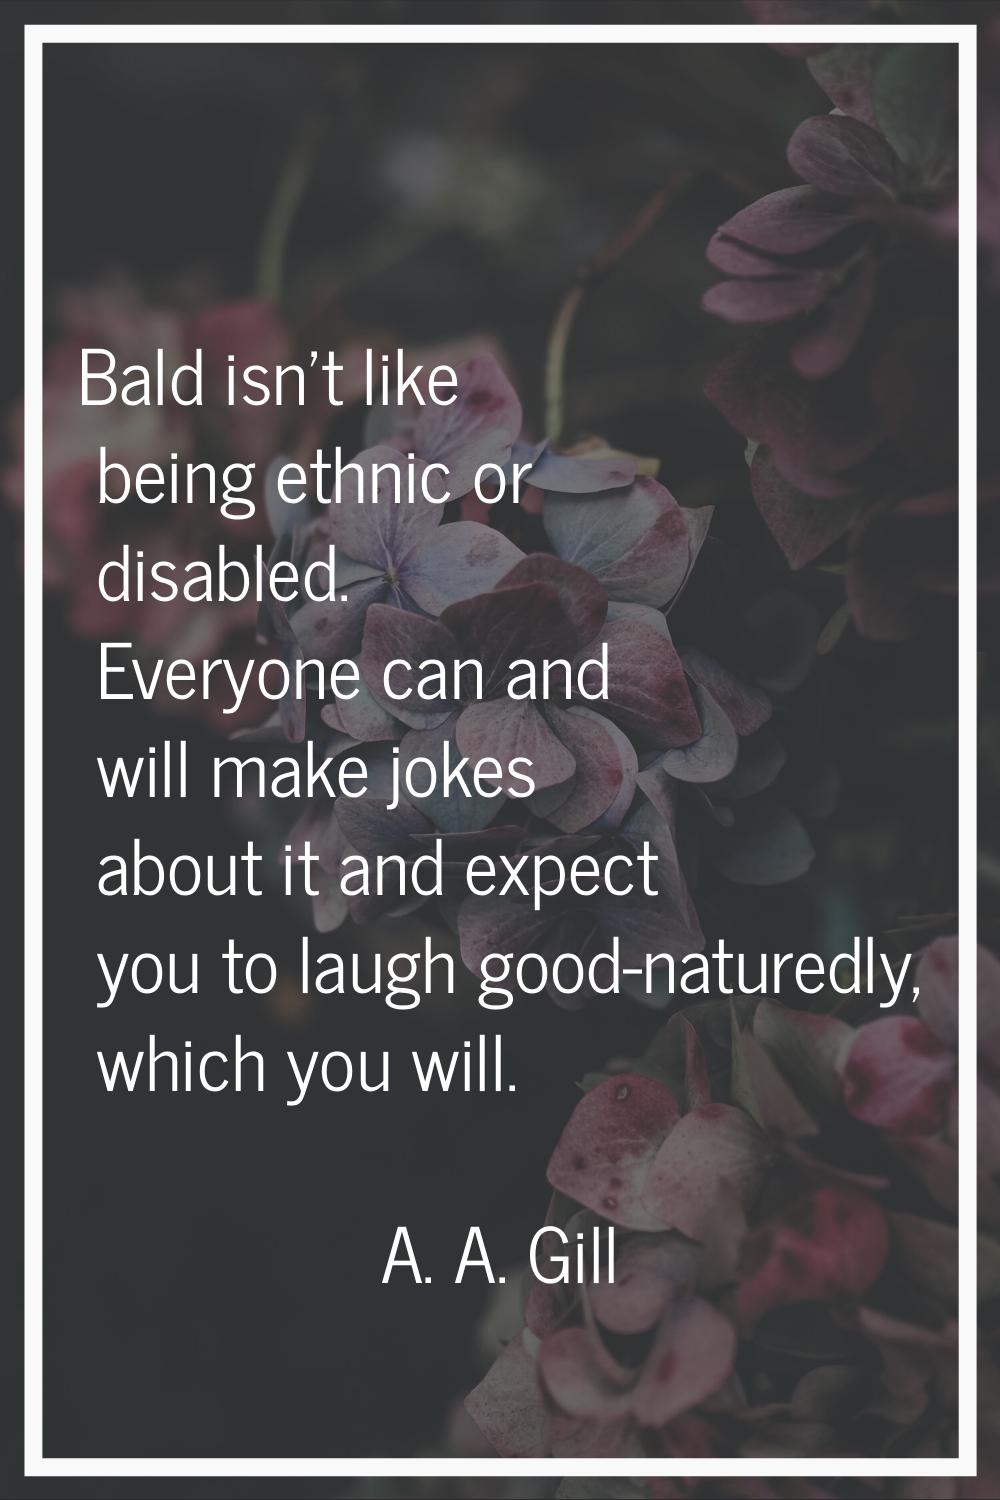 Bald isn't like being ethnic or disabled. Everyone can and will make jokes about it and expect you 